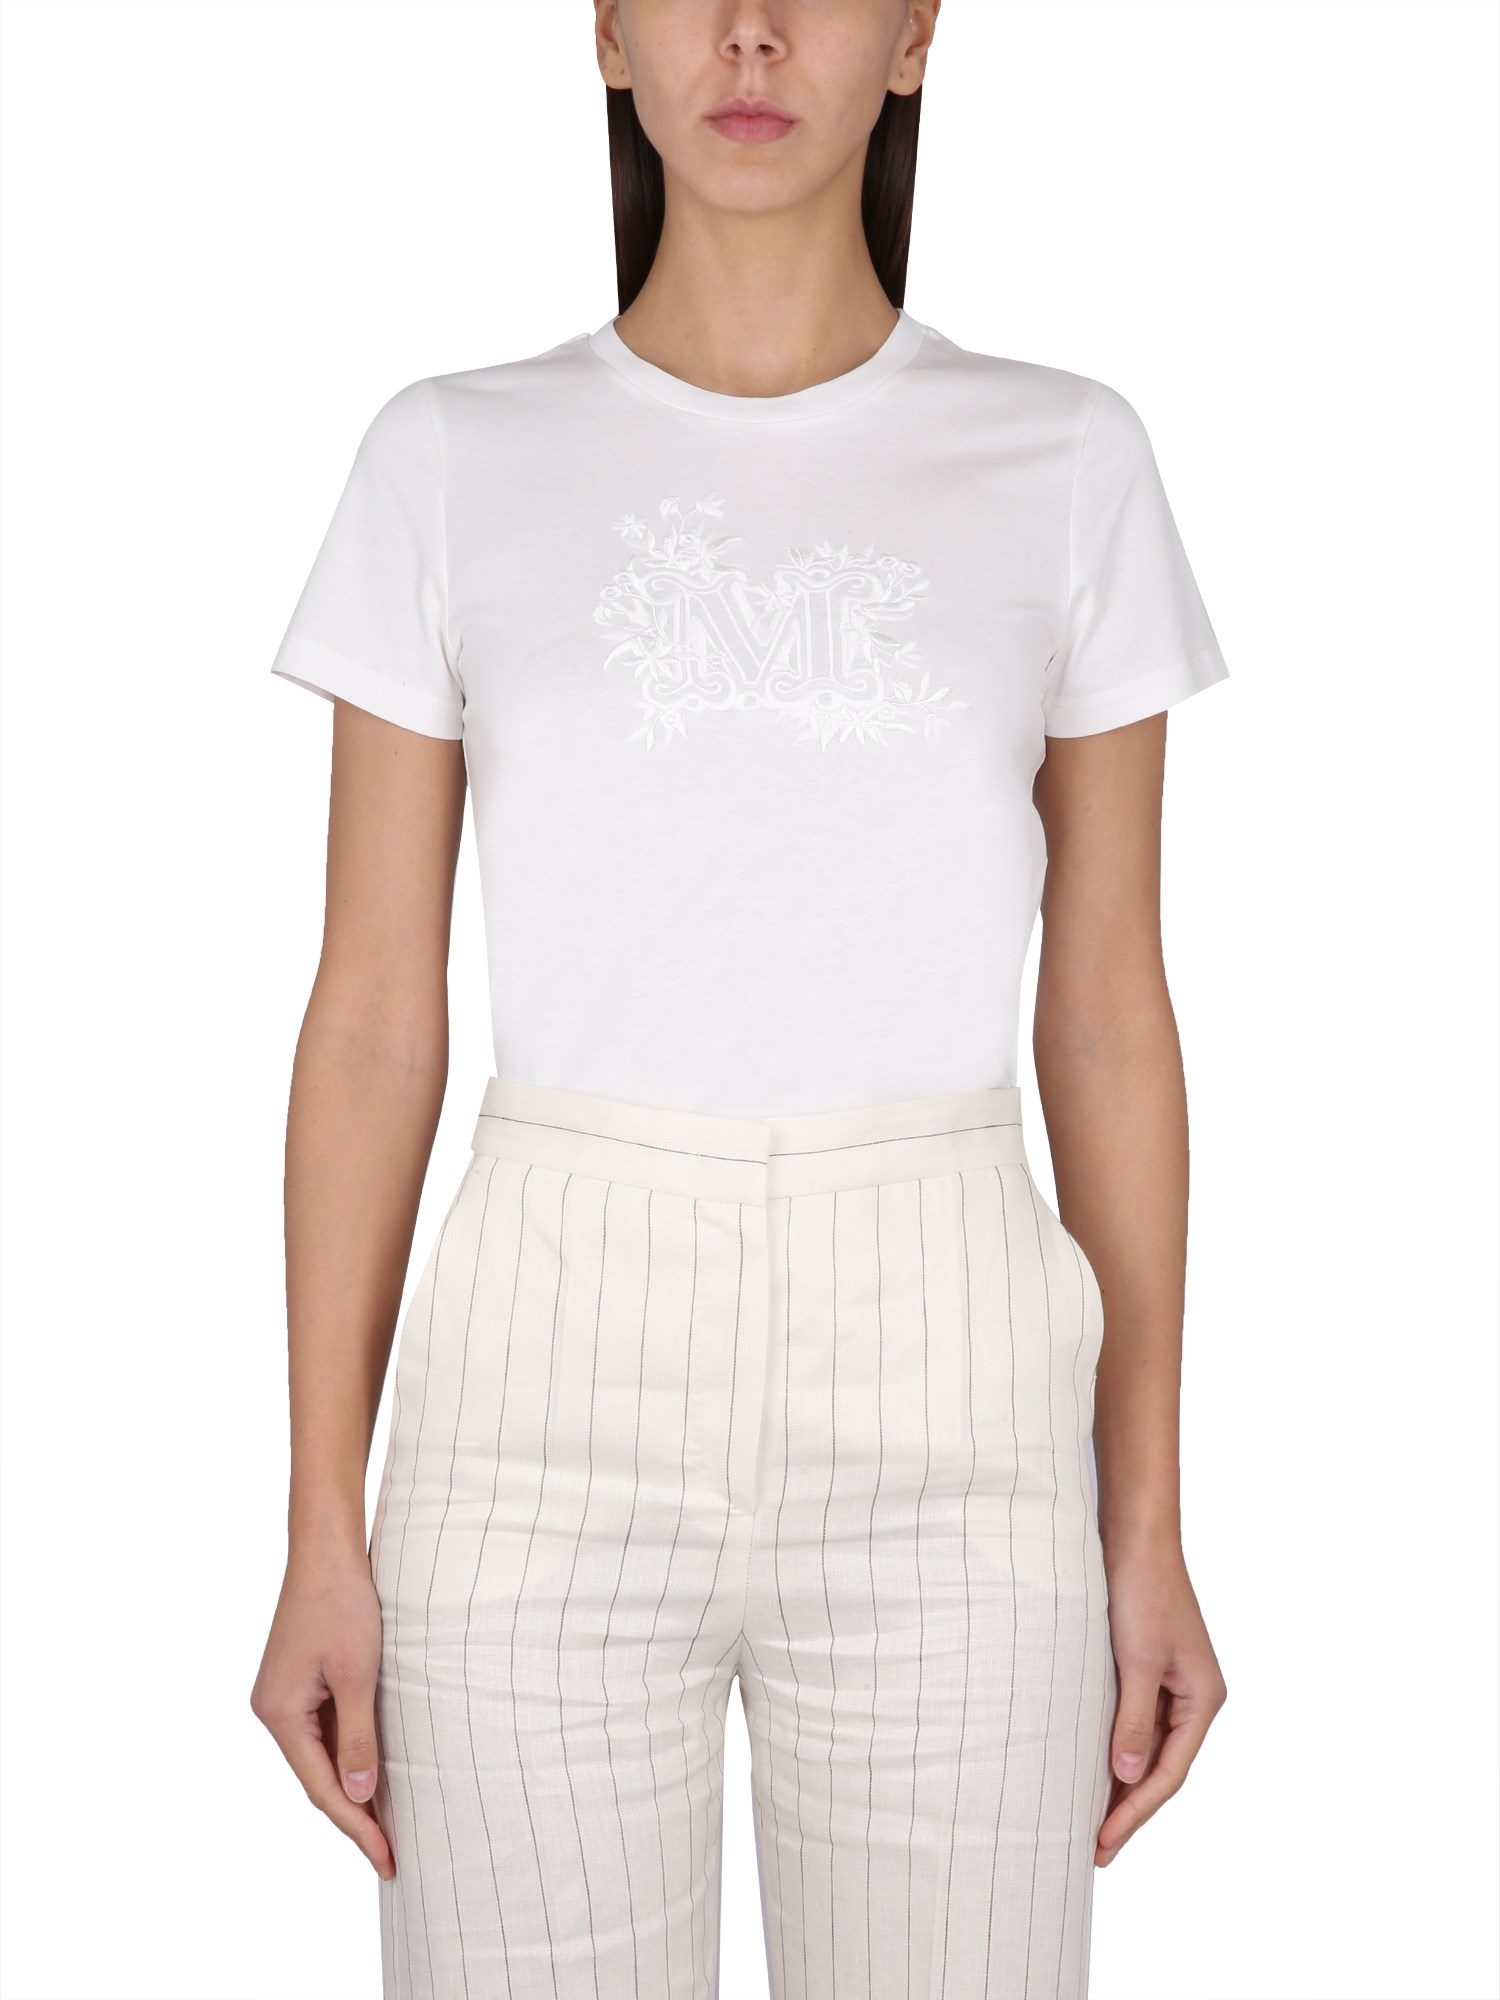 max mara t-shirt with logo embroidery